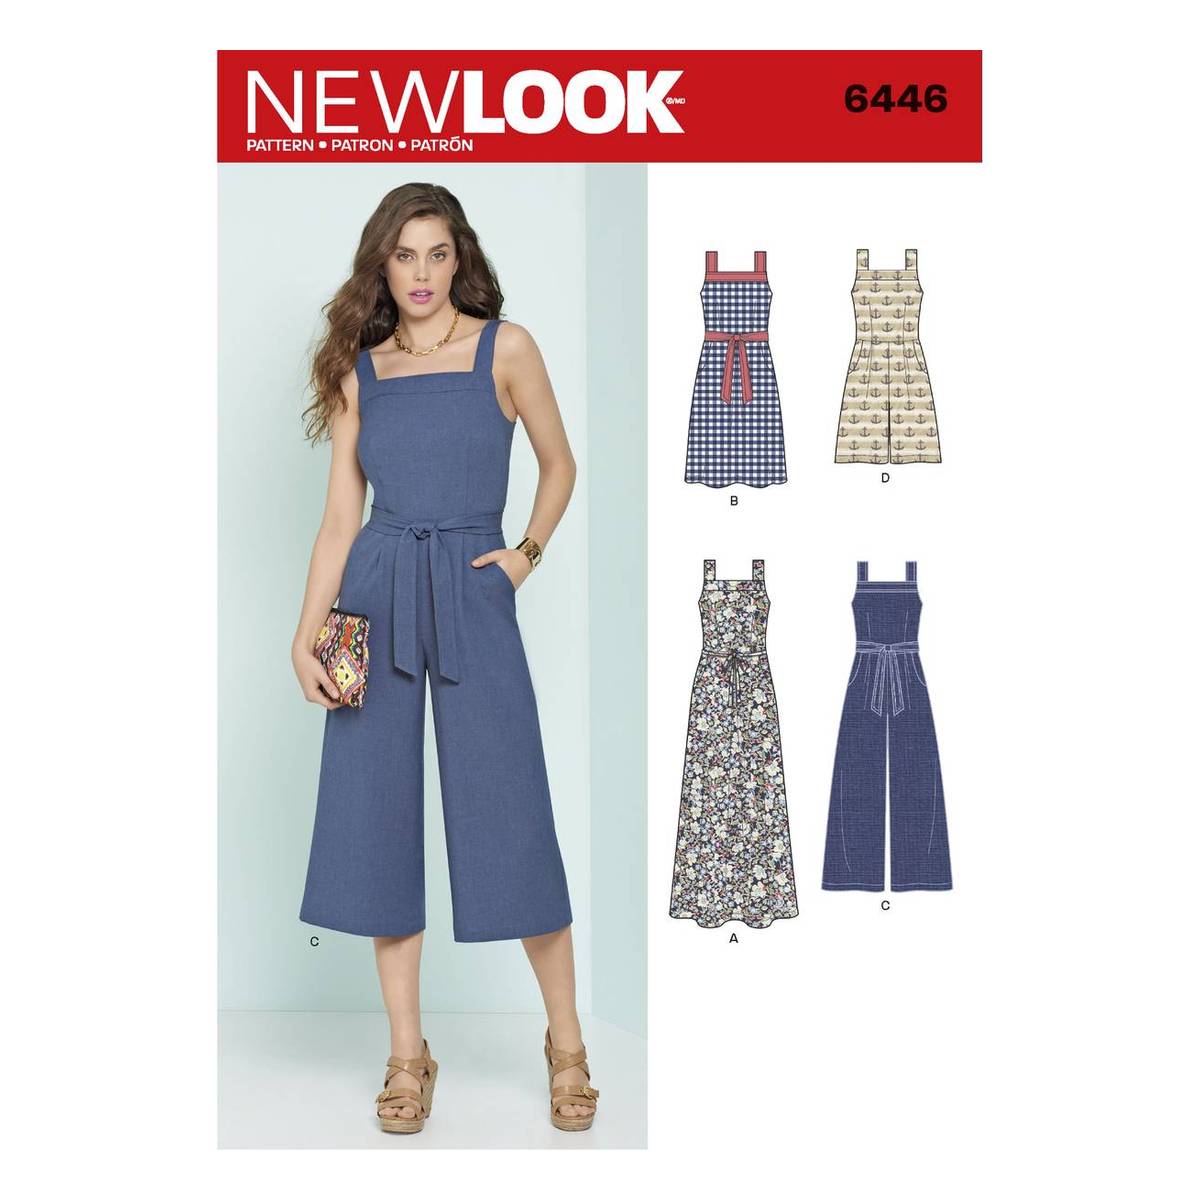 New Look Women's Jumpsuit and Dress Sewing Pattern 6446 | Hobbycraft